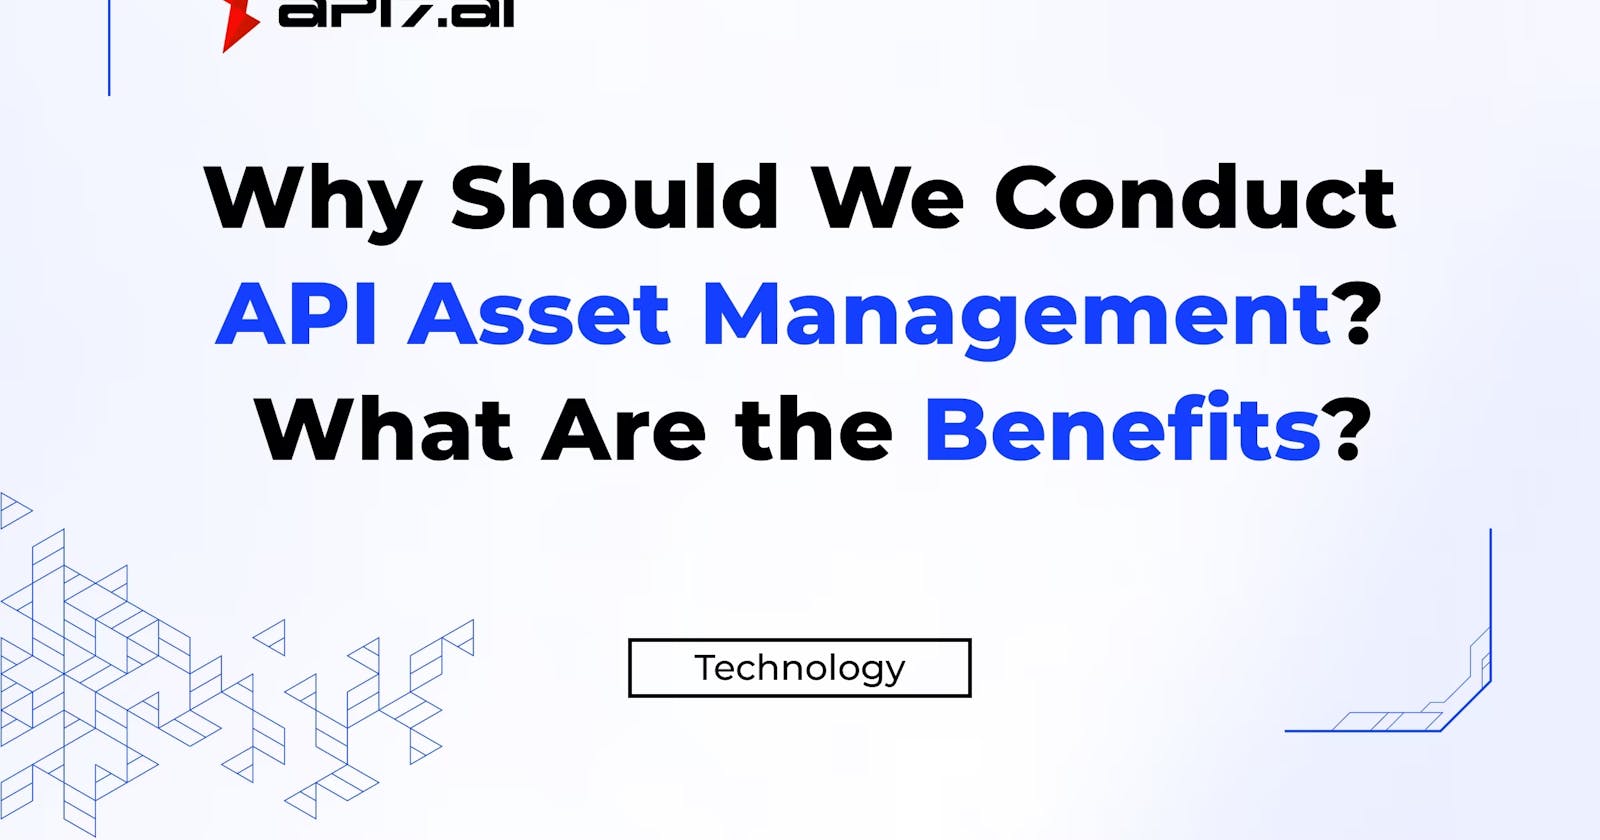 Why Should We Conduct API Asset Management? What Are the Benefits?